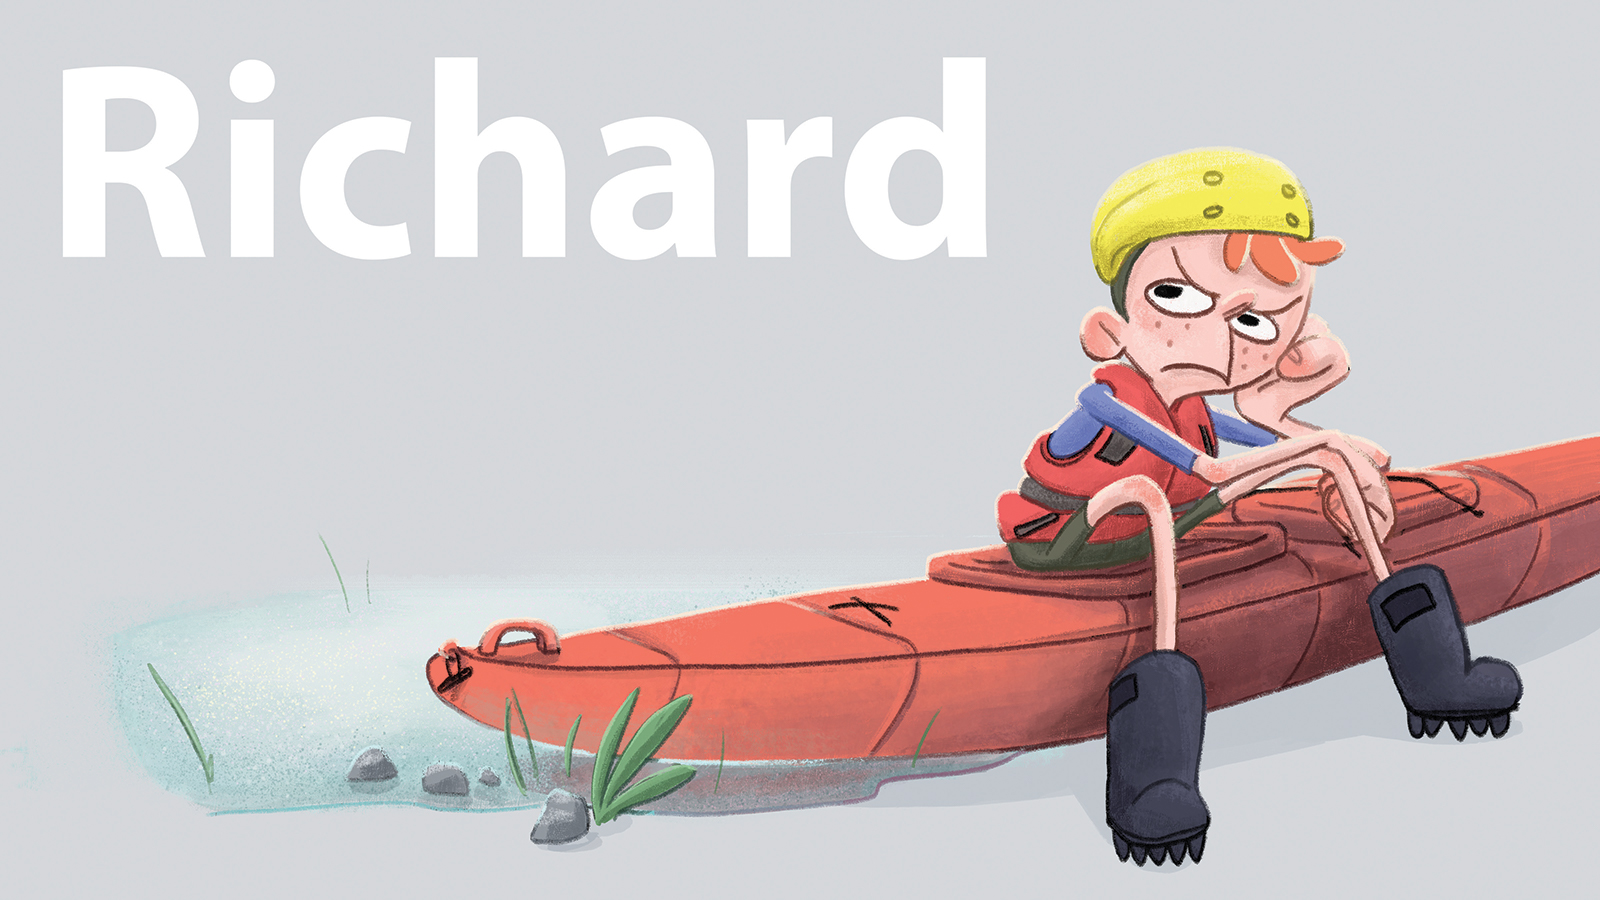 An annoyed boy in outdoors gear sits on a kayak.